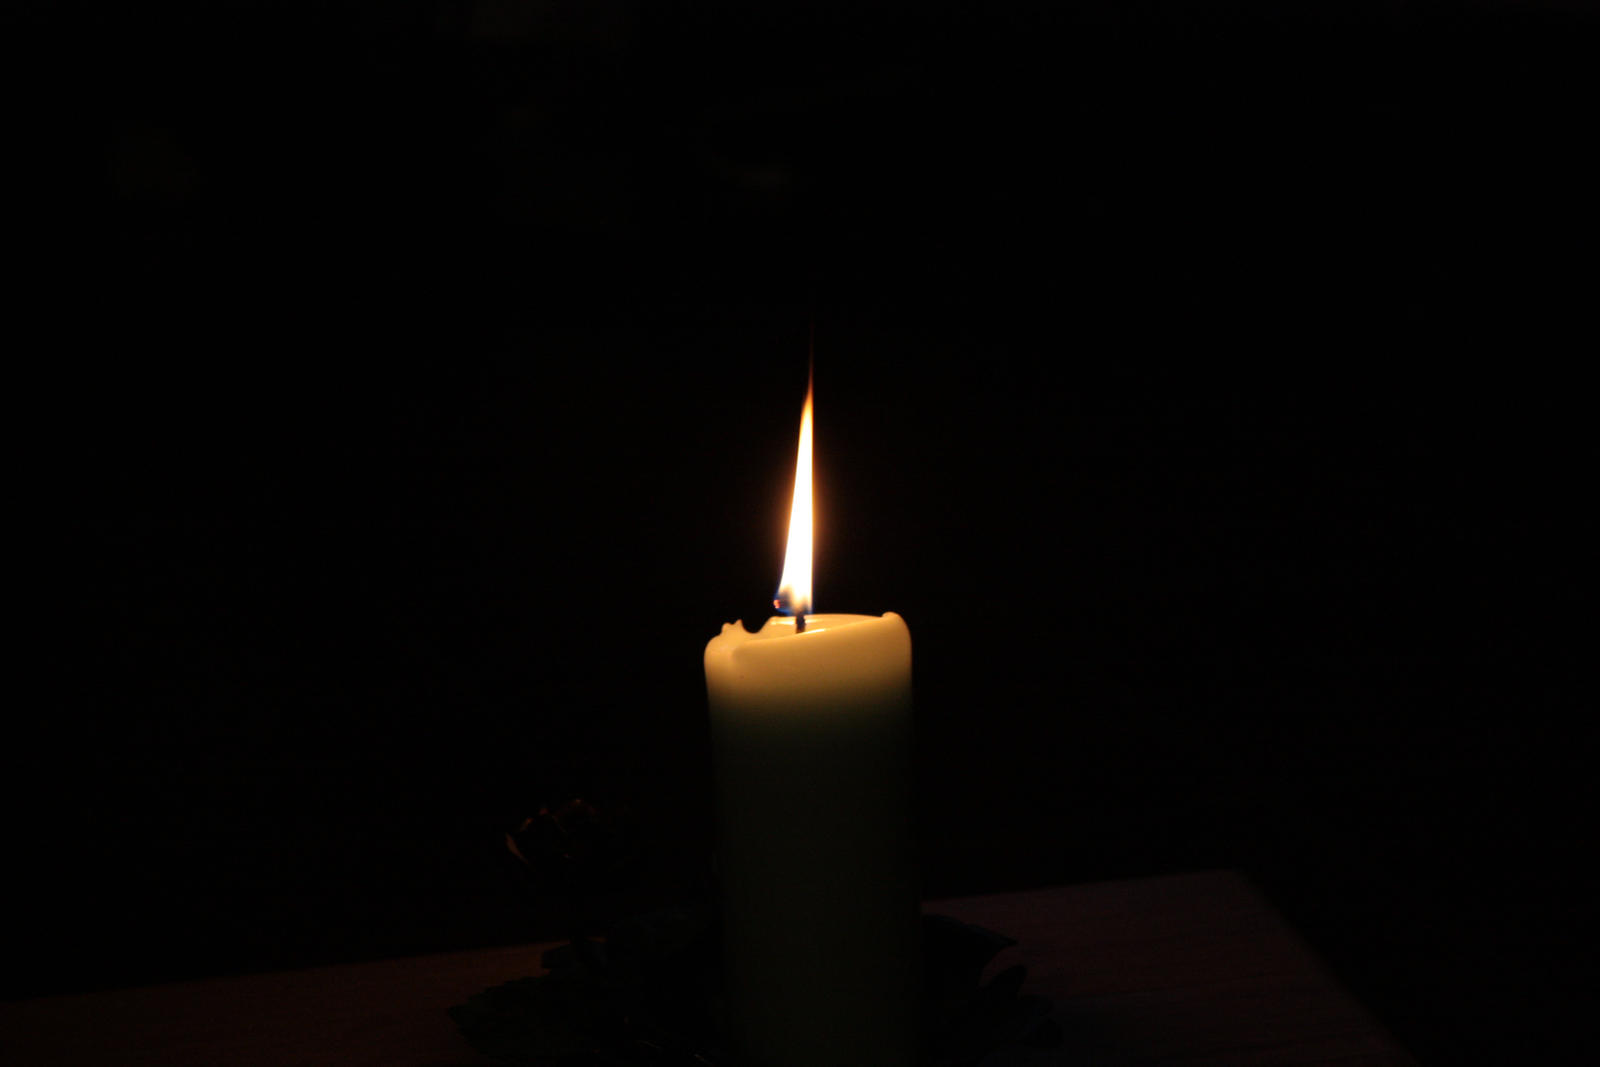 A_candle_in_the_dark_by_Reporter86.jpg